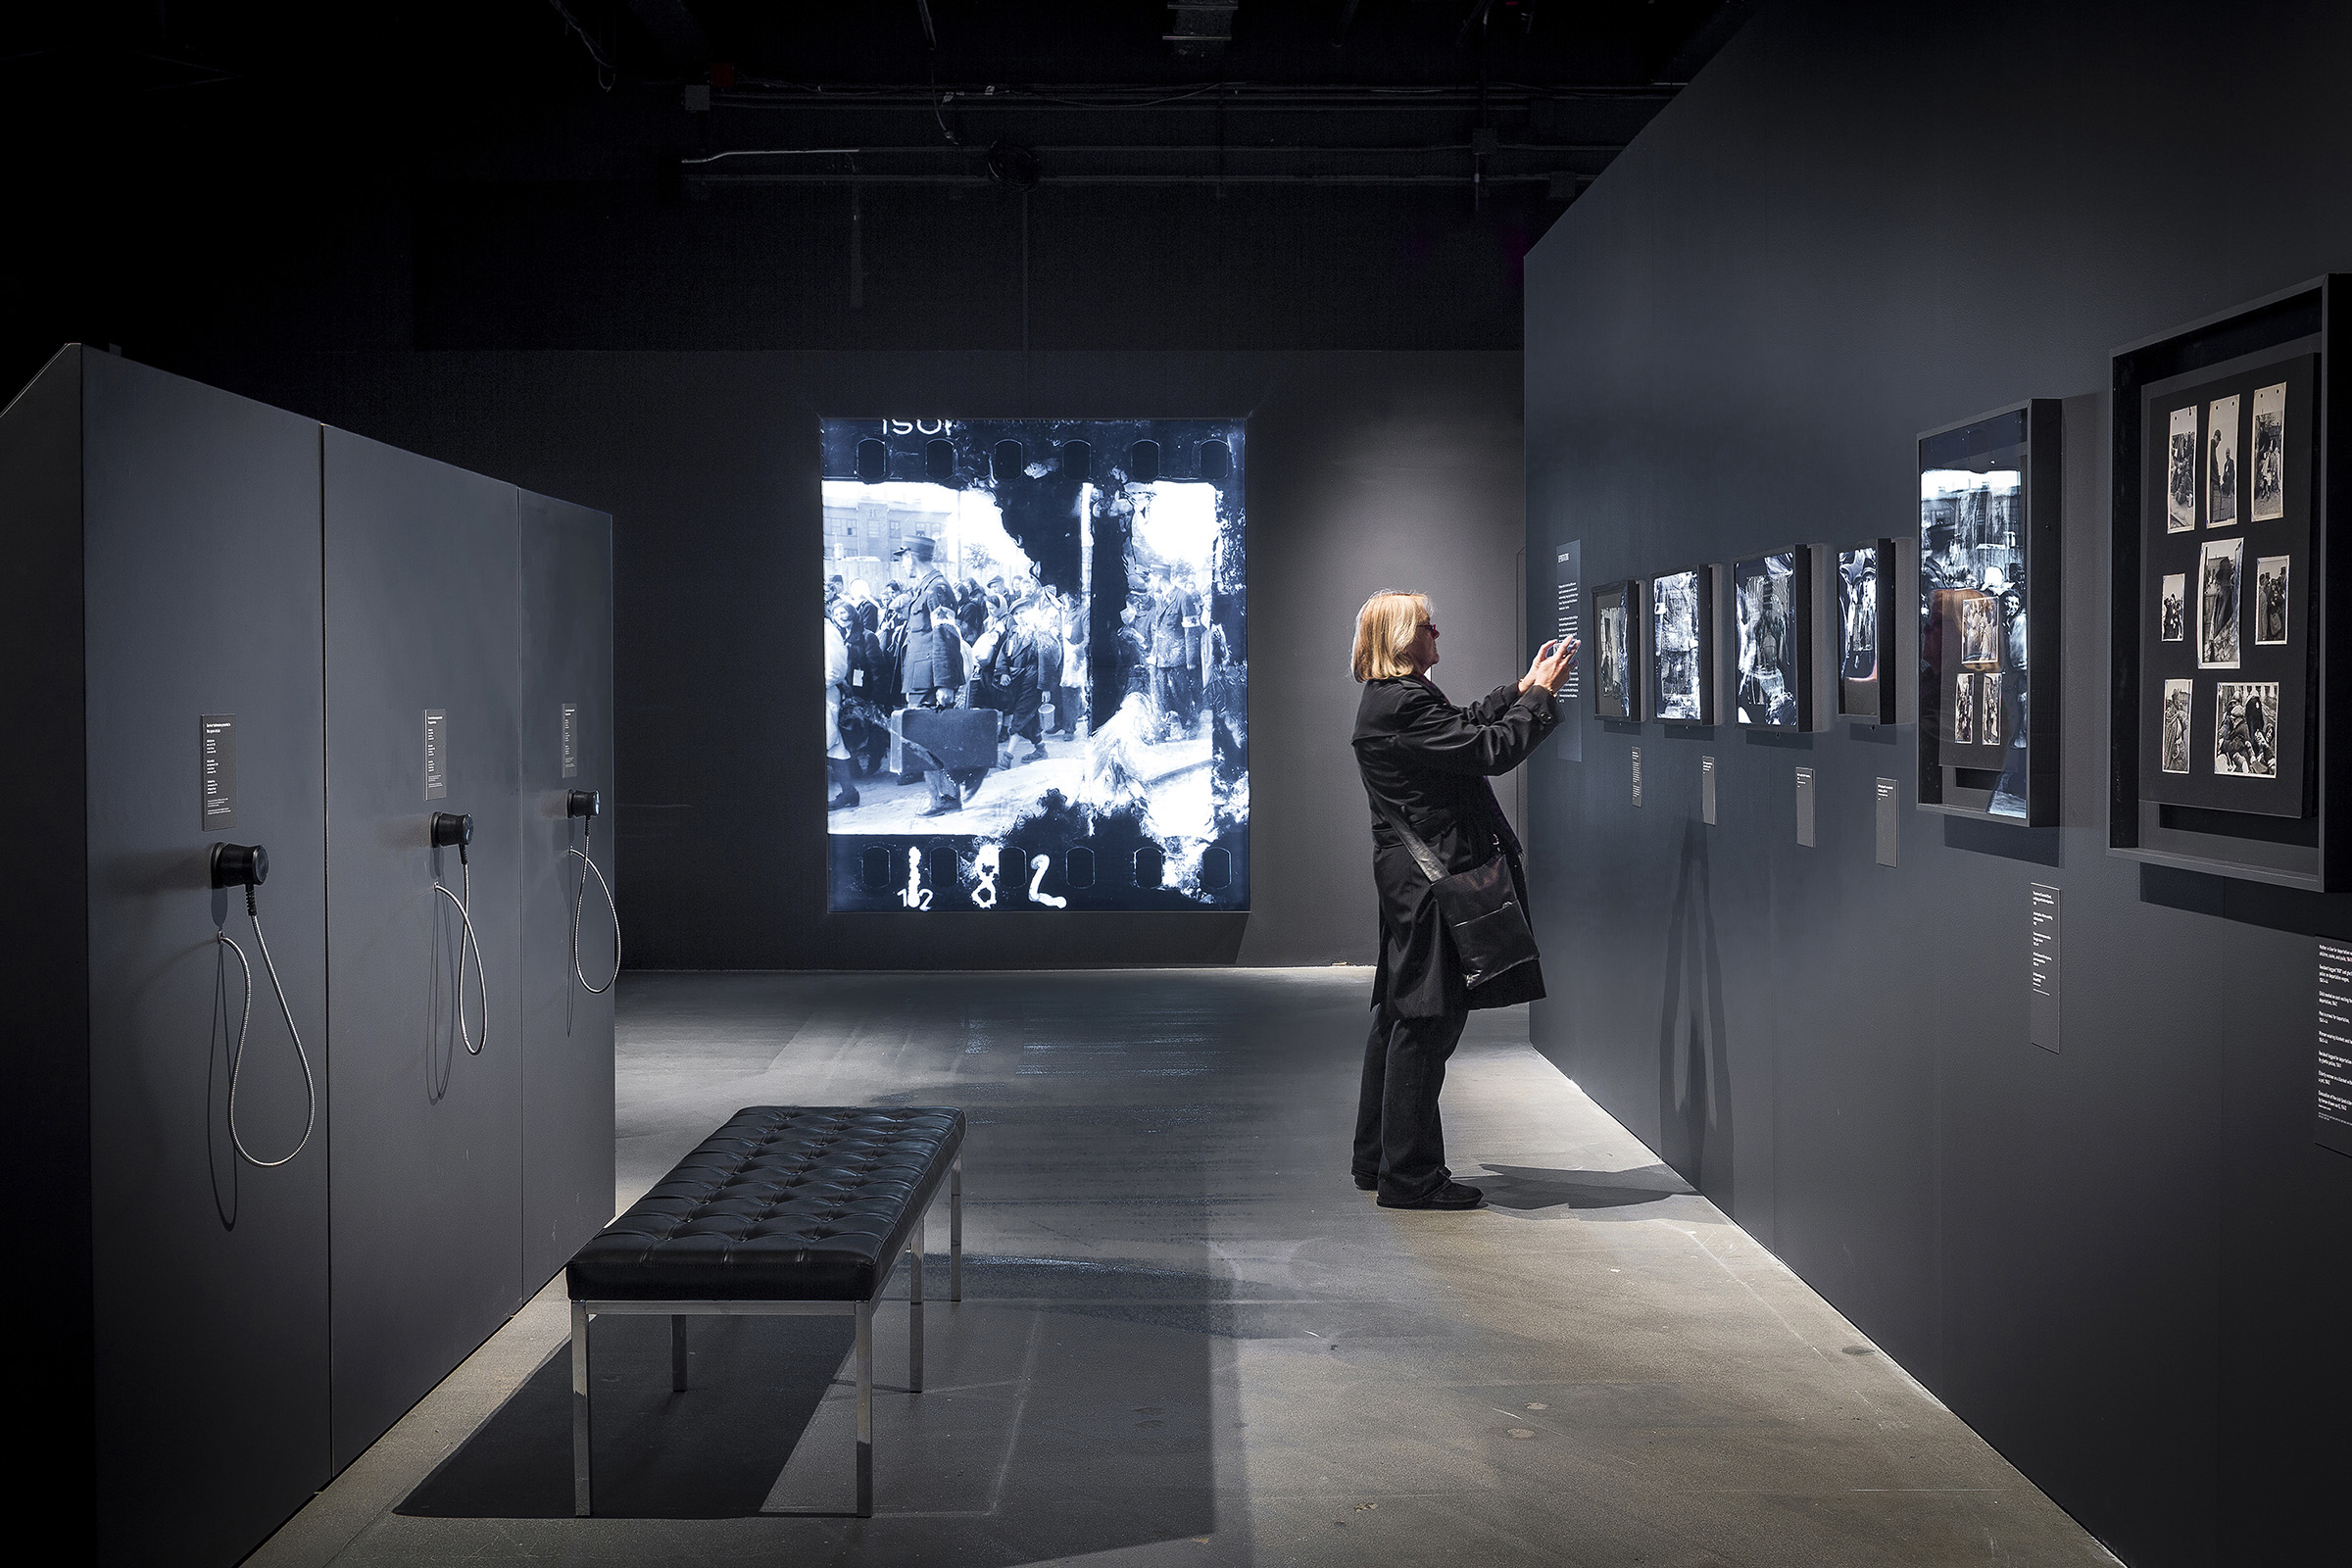 Memory Unearthed - On the opposite side of a triangular wall displaying photographs, P+A implemented listening stations so that visitors could hear recorded testimony from survivors of the Lodz Ghetto.